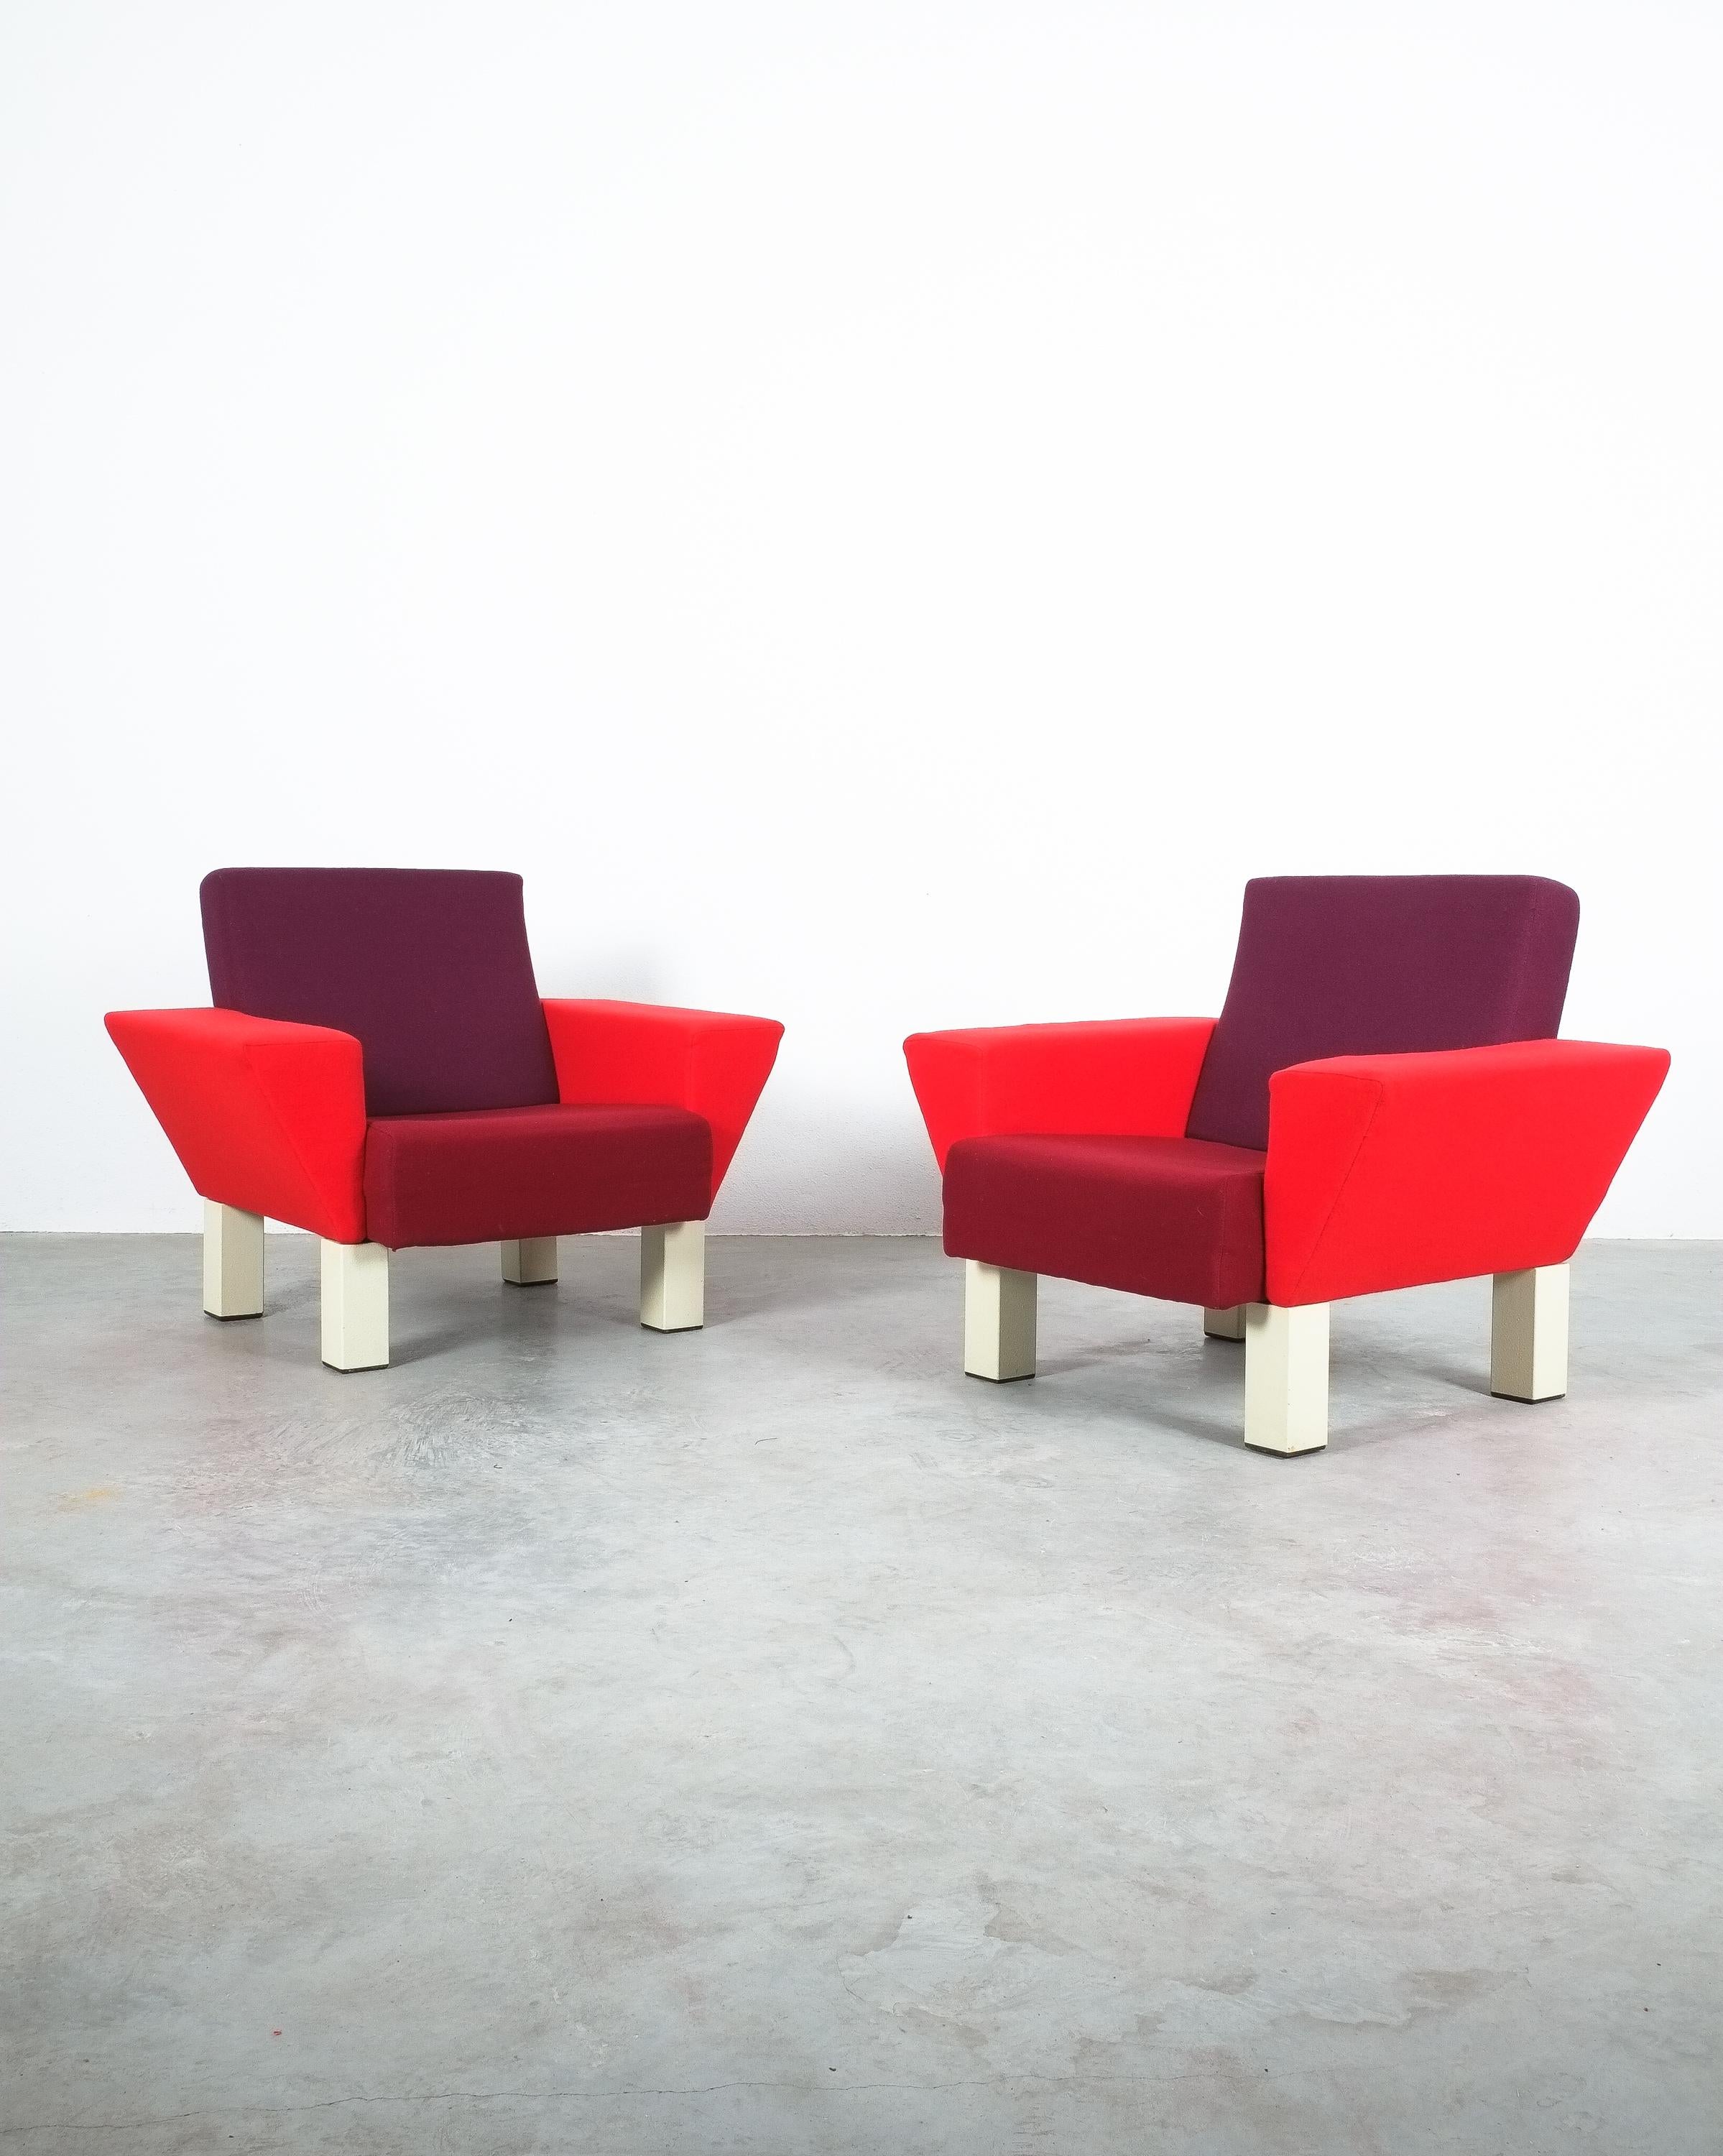 Rare pair of vintage 'Westside' armchairs by Ettore Sottsass for Knoll, 1983 in great condition

Iconic west side designed by Ettore Sottsass in 1983. Stylish and very comfortable oversized chairs in 3 different shades of red and violet on heavy